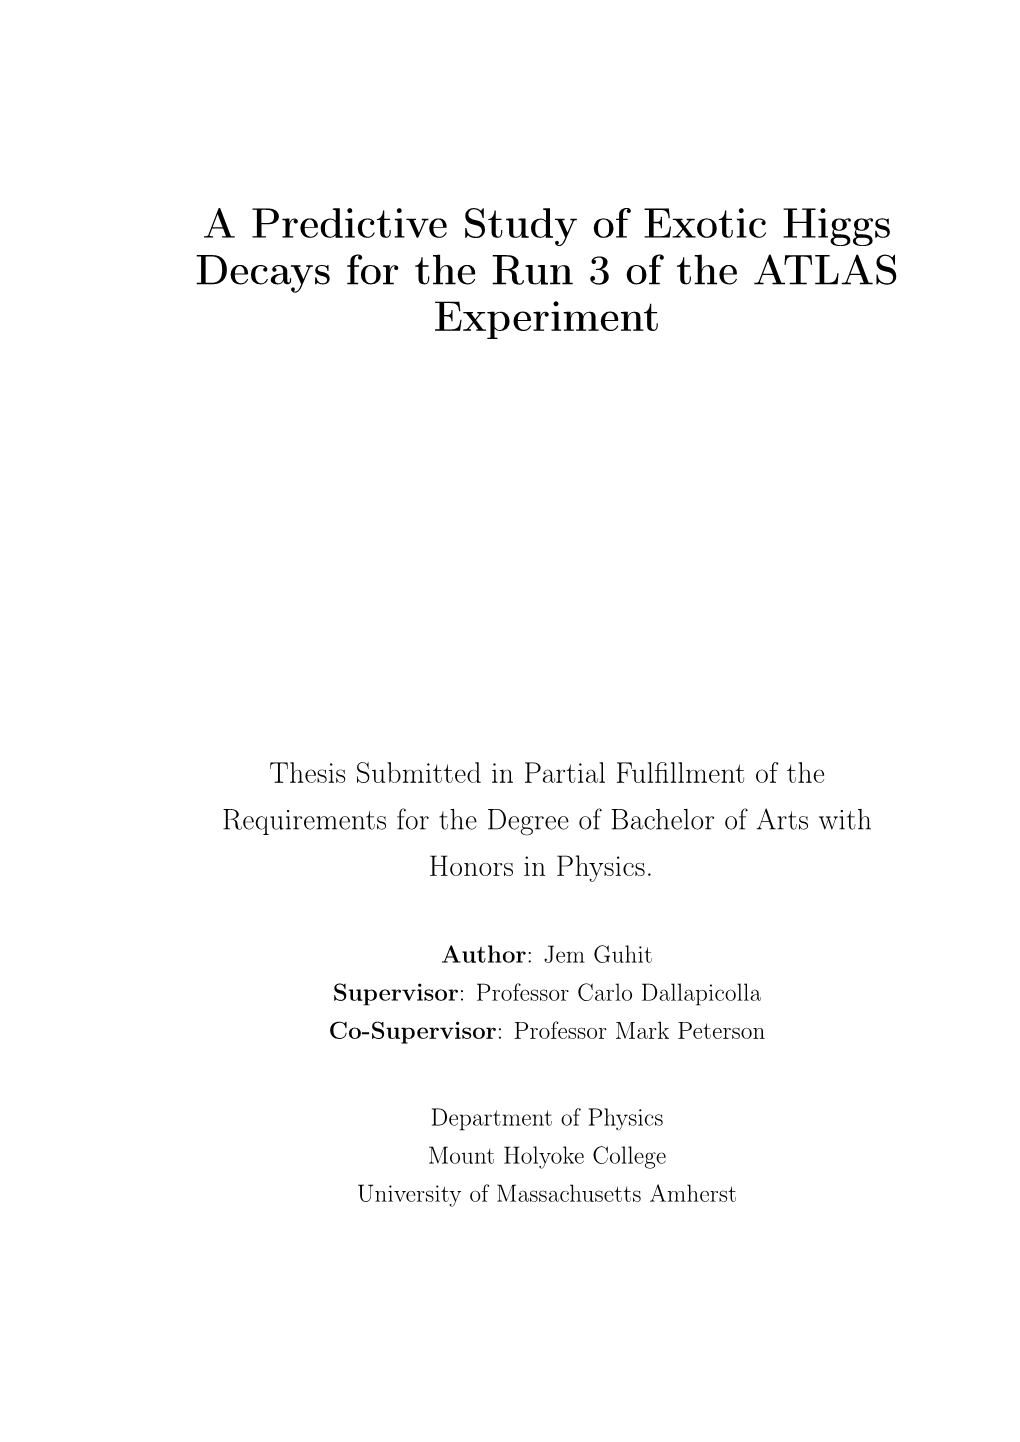 A Predictive Study of Exotic Higgs Decays for the Run 3 of the ATLAS Experiment